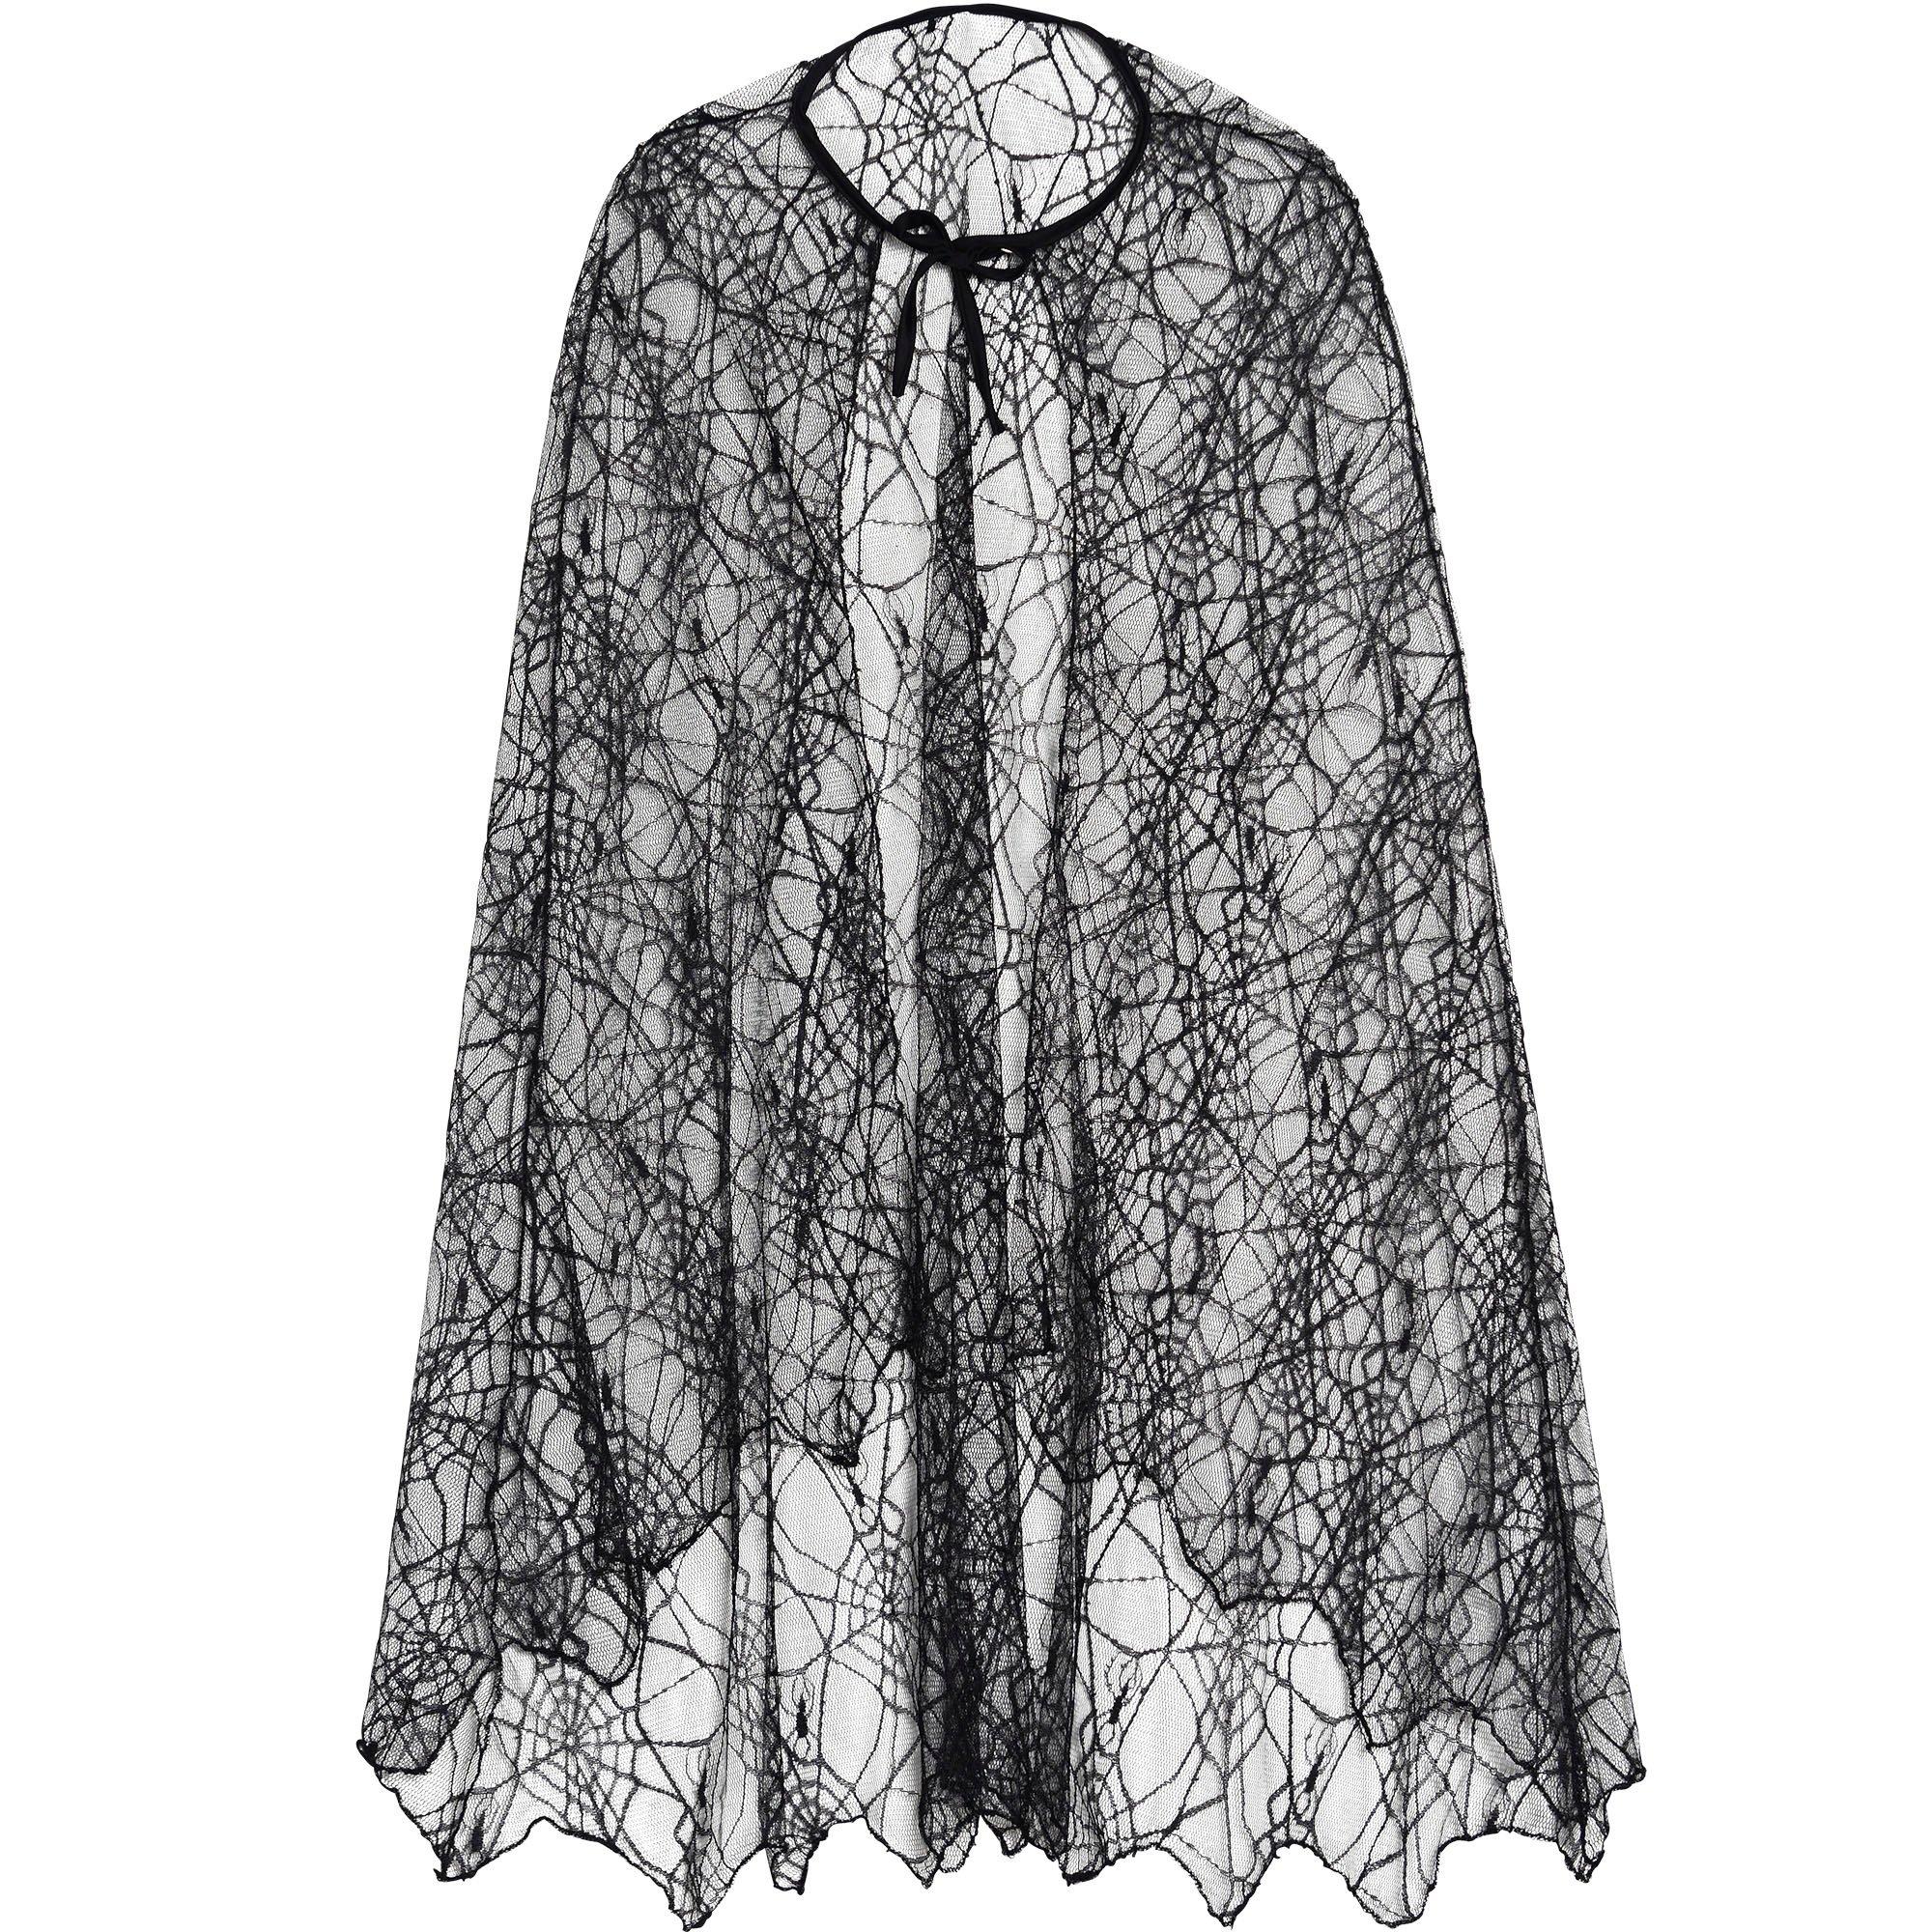 Adult Spider Web Cape